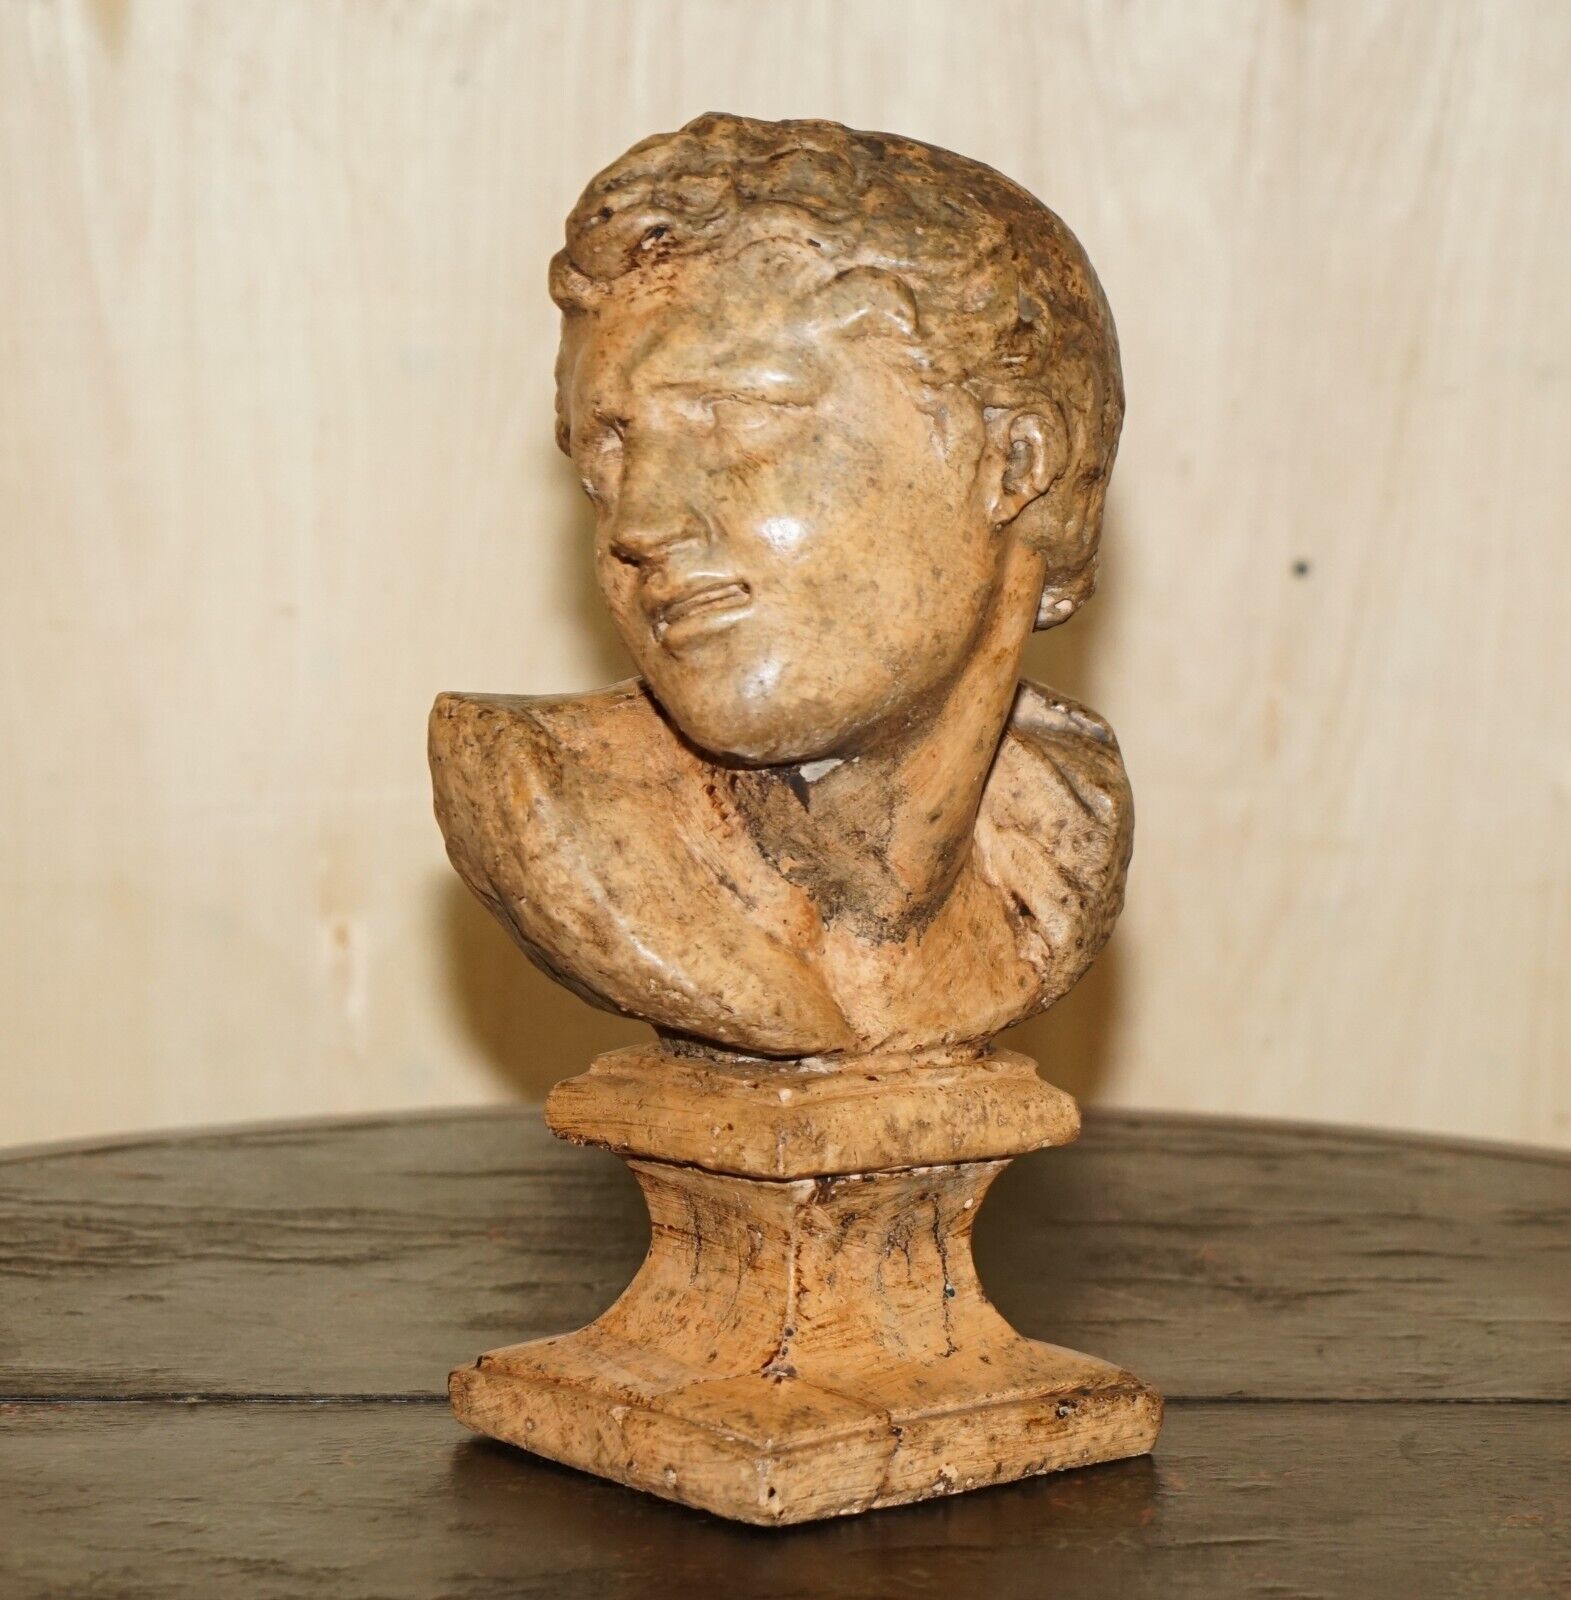 DECORATIVE ANTIQUE WEATHERED CIRCA 1900 TERRACOTTA CLASSICAL BUST OF HERCULES